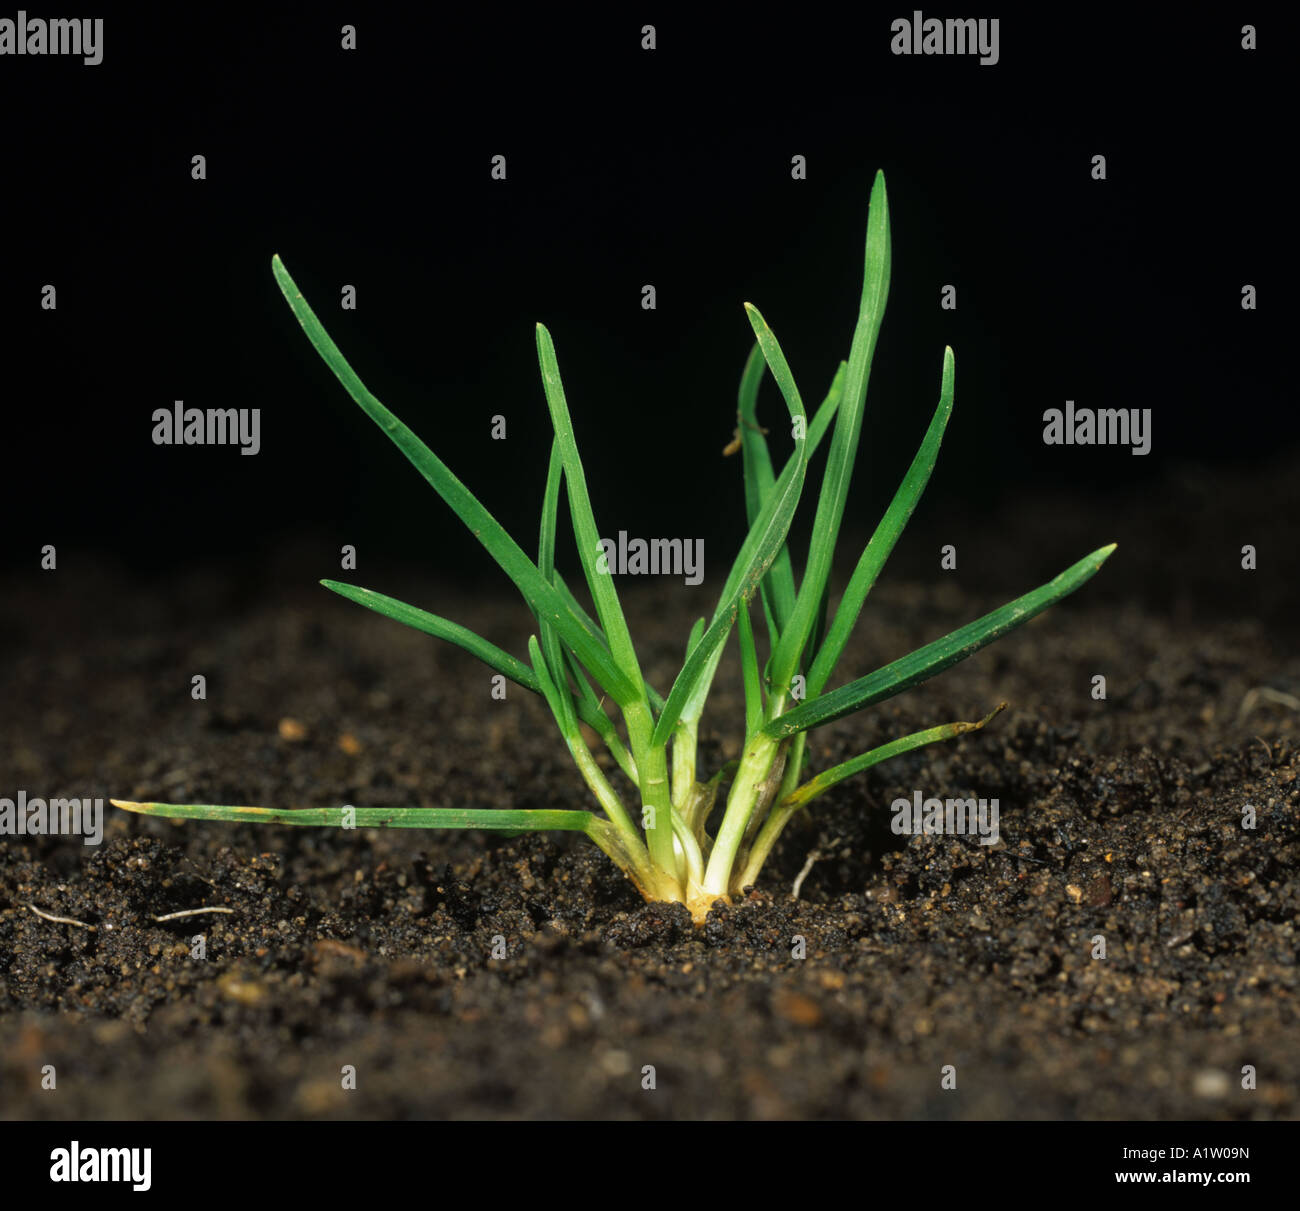 Annual meadowgrass Poa annua young grass weed plant Stock Photo